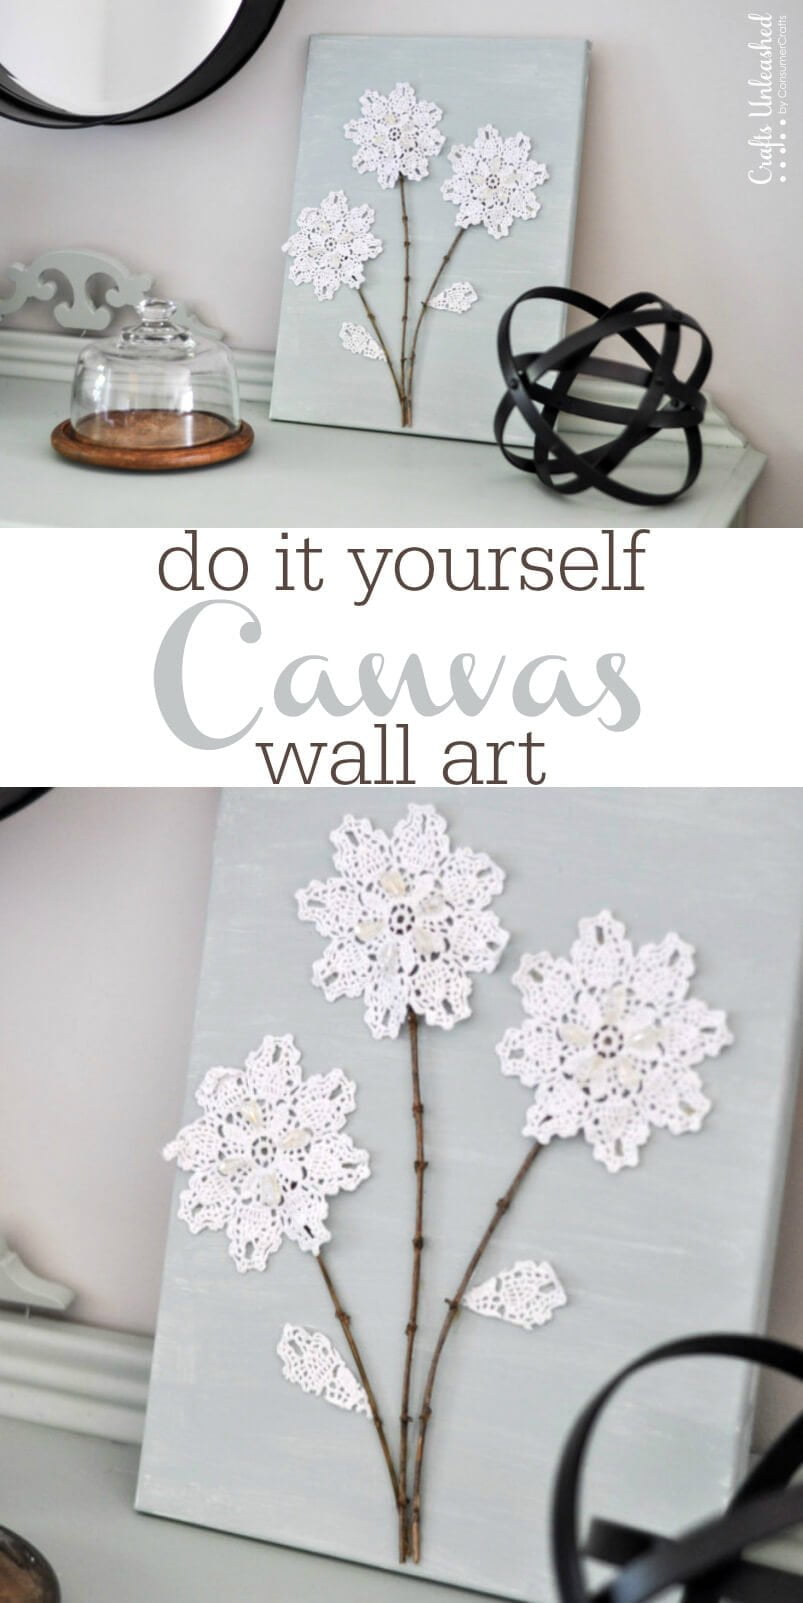 15 Beautiful DIY Wall Art Ideas For Your Home - Style Motivation